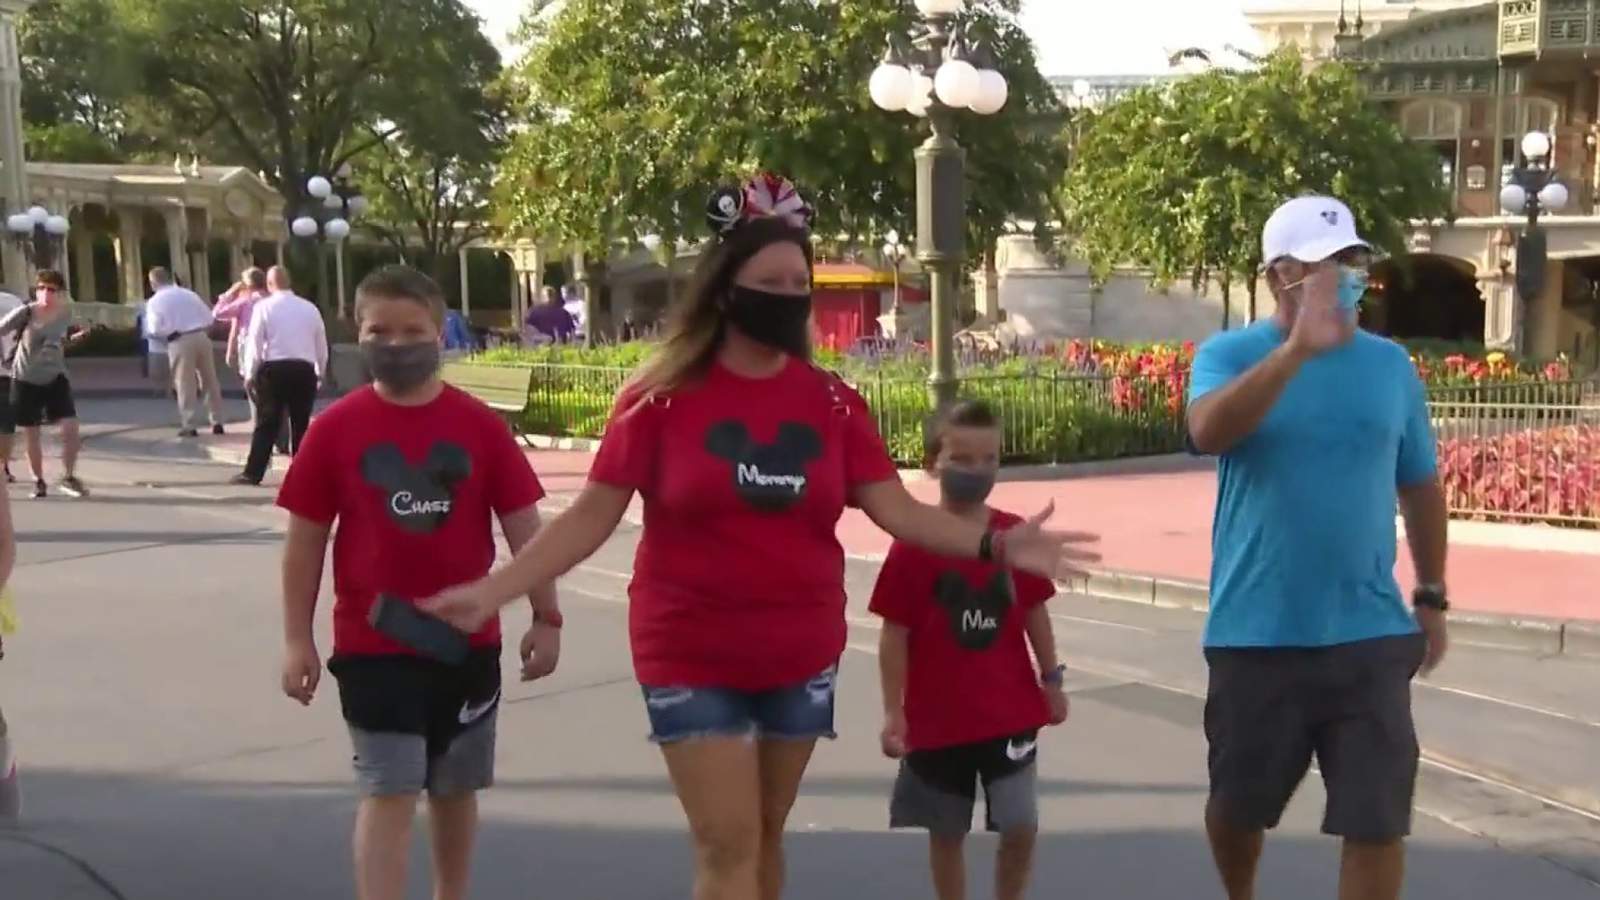 Disney relaxes mask policy for guests taking photos outdoors